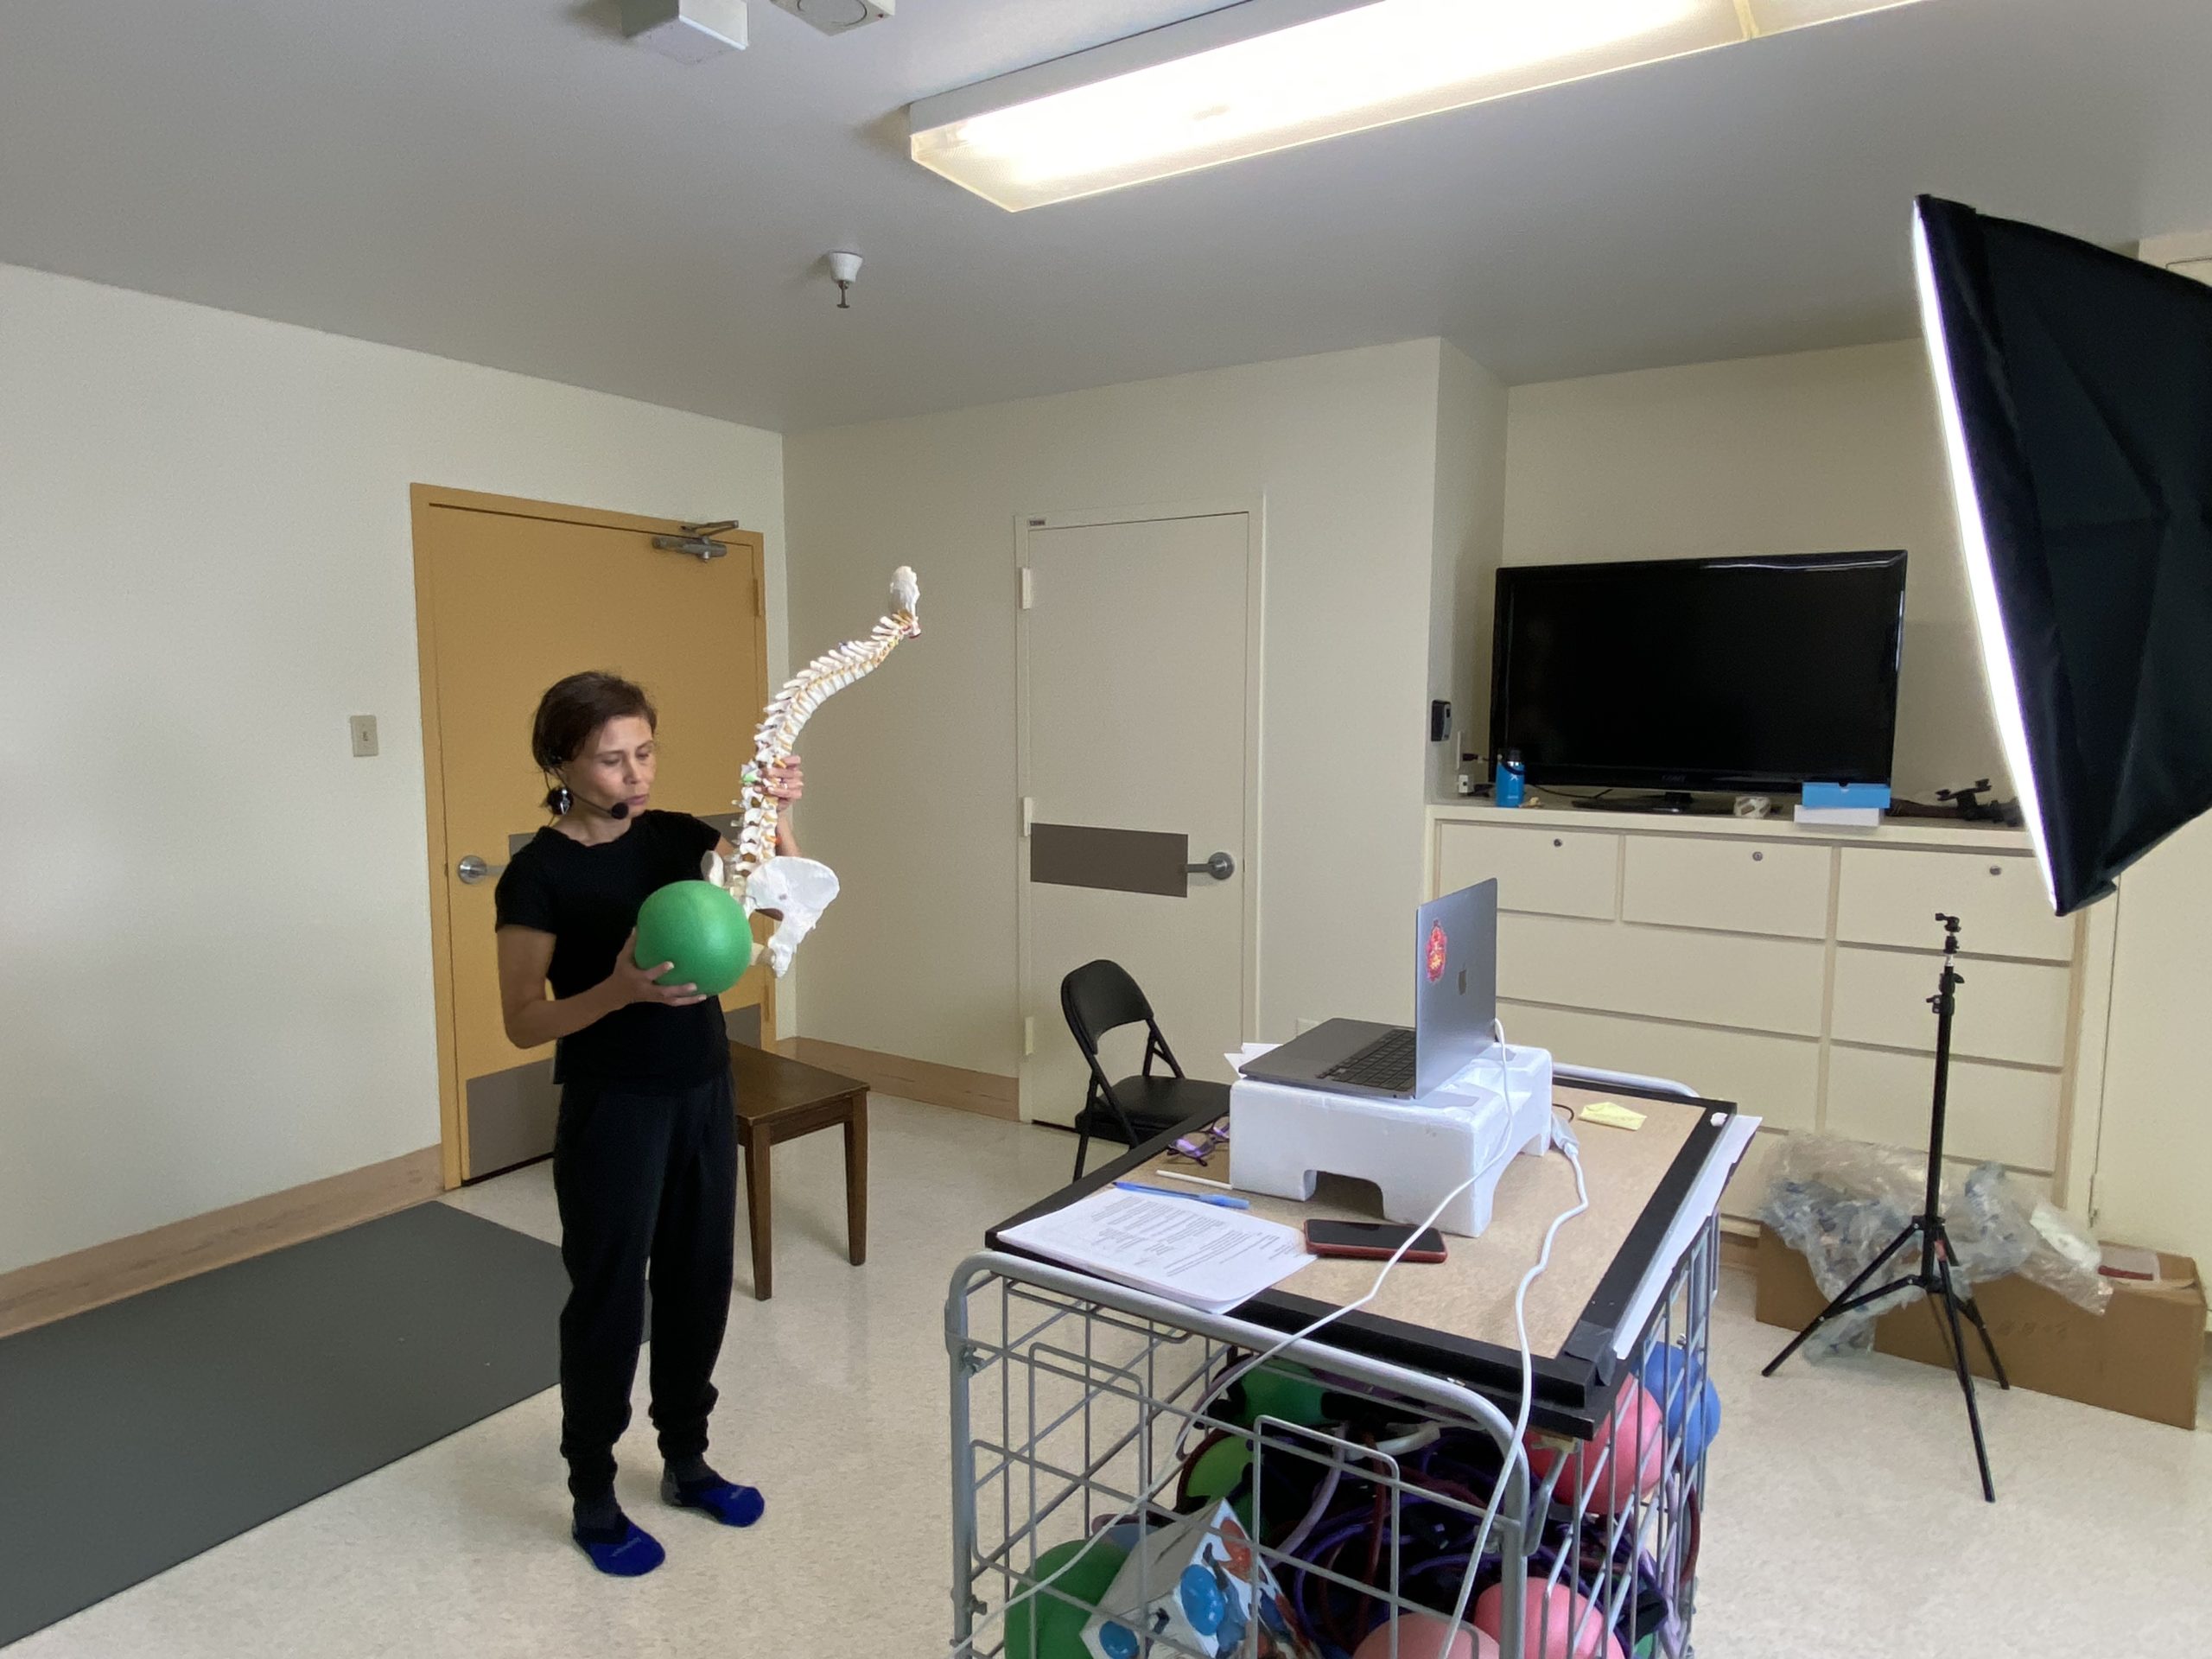 Somatic movement practitioner Diana Lara holds a green ball next to the coccyx of a spine model.